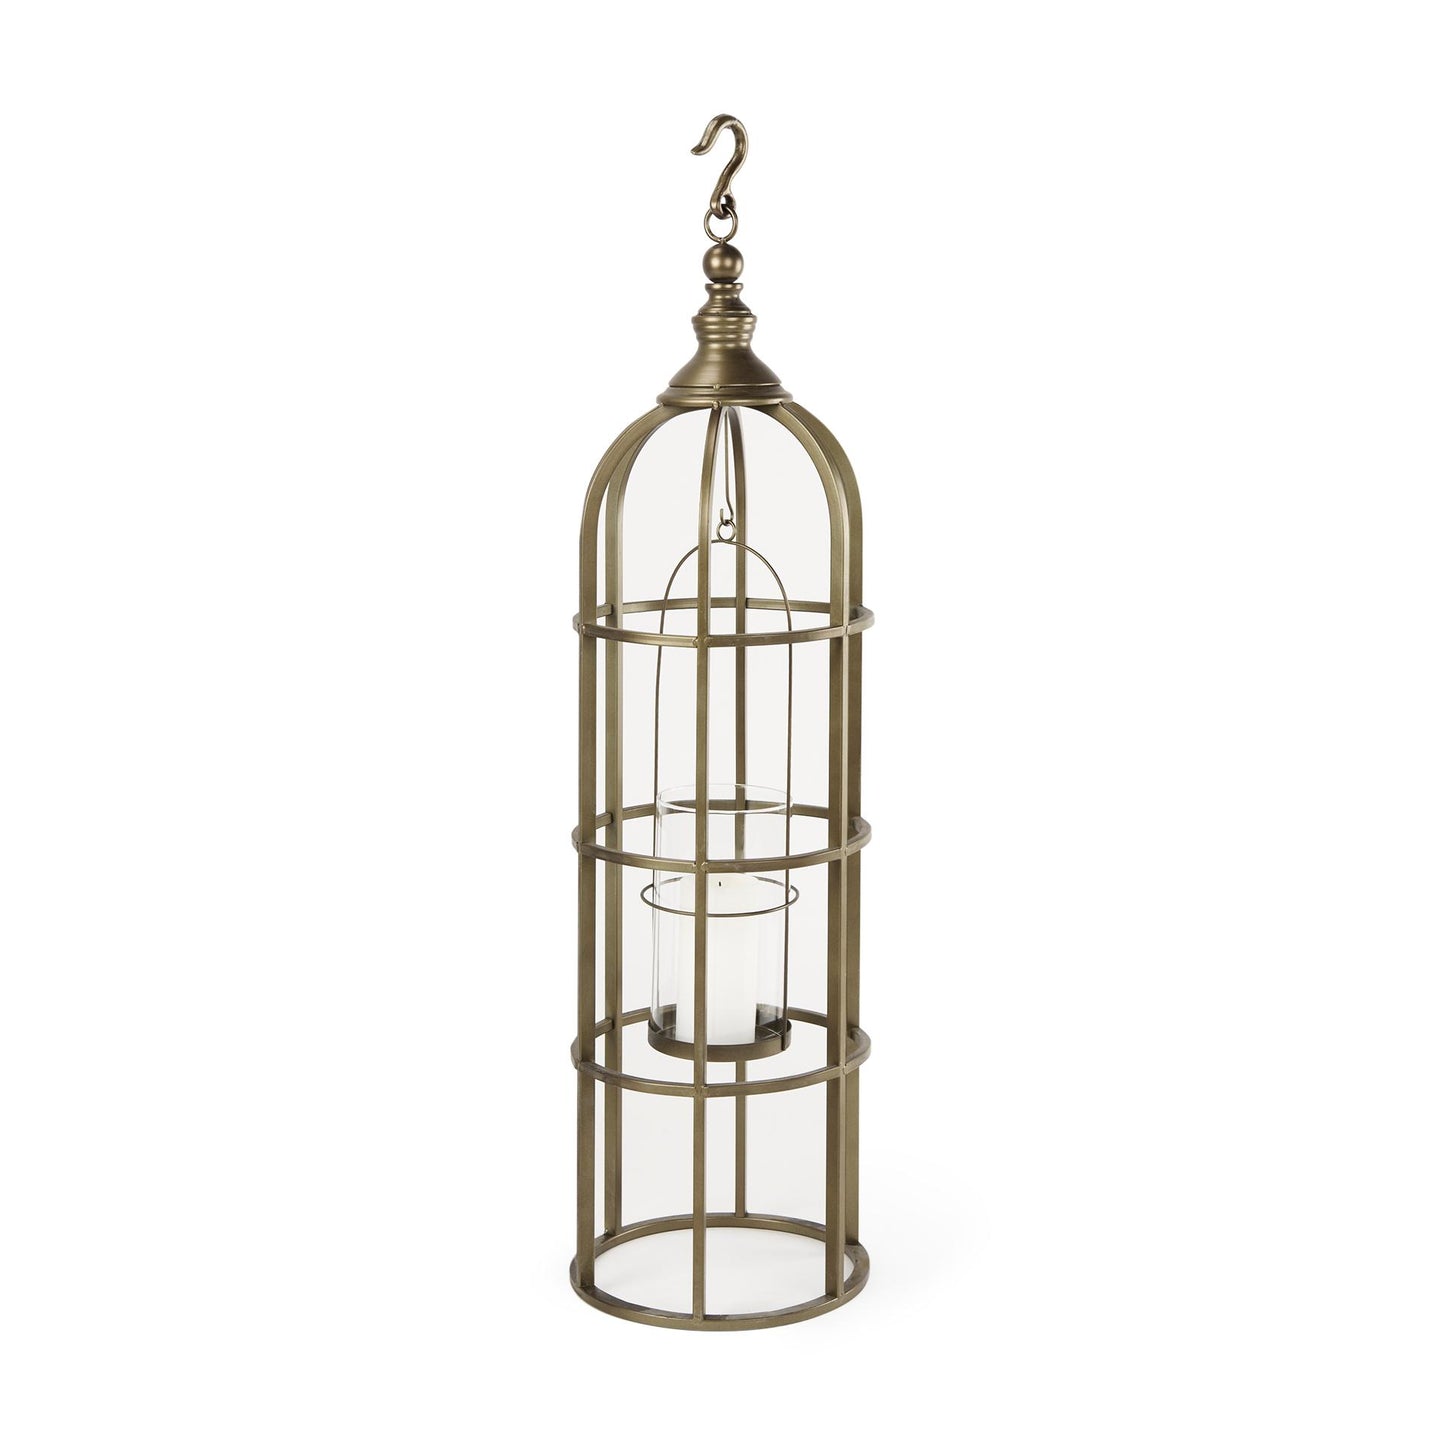 Gerson I Large Cage-Style Gold Metal Candle Holder Lantern